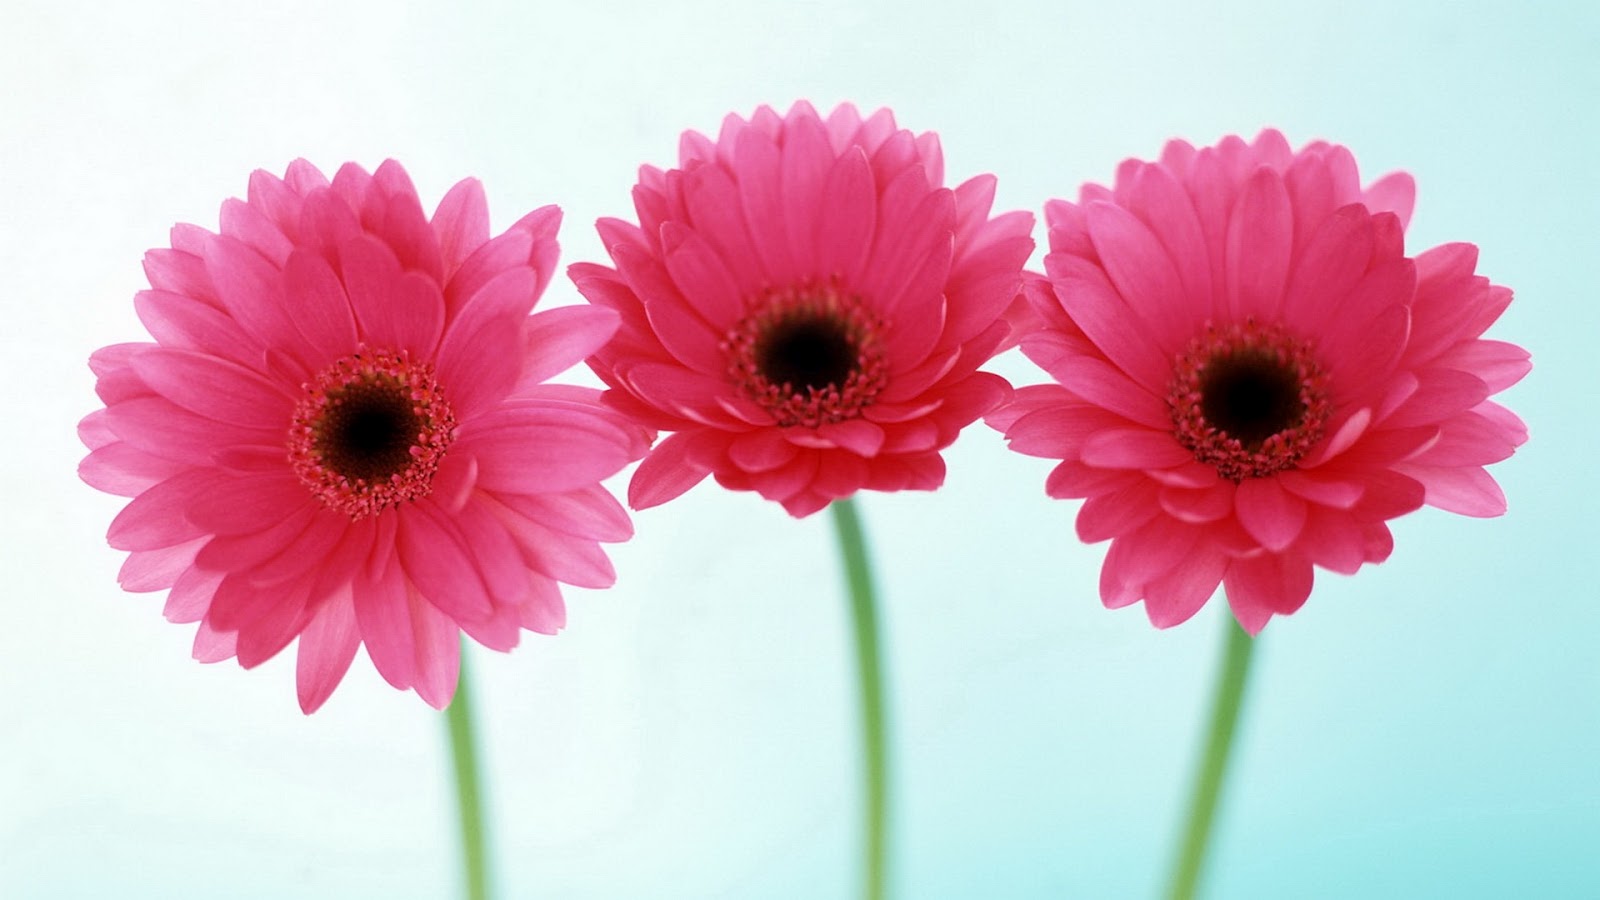 flowers for flower lovers HD flowers wallpapers